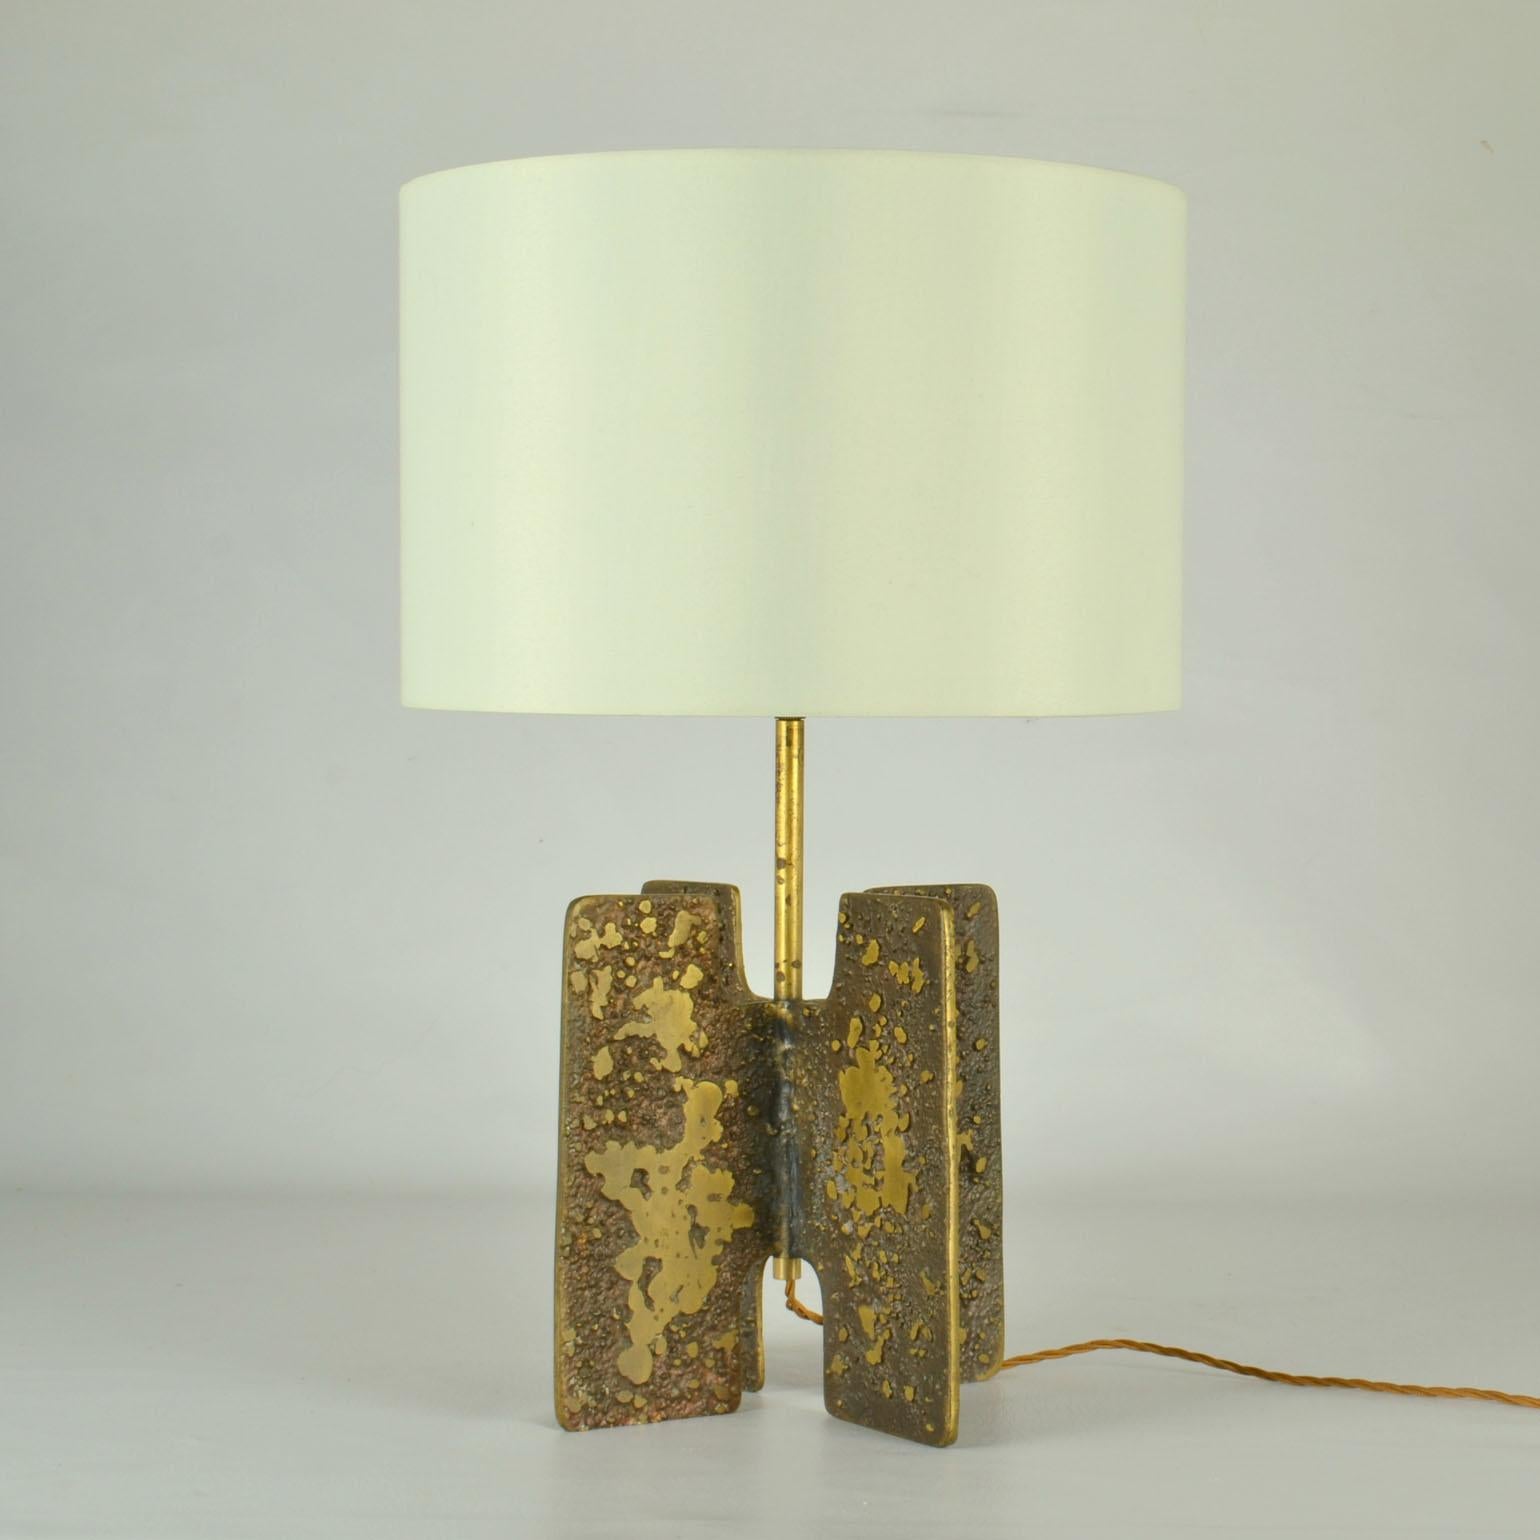 Pair of exceptional cast bronze table lamps in the manner of Jean Michel Frank. The base is simply formed in the X shape of an extruded cross. This demonstrates perfectly balance of minimalist lines and texture. 
The design of the lamps are in the